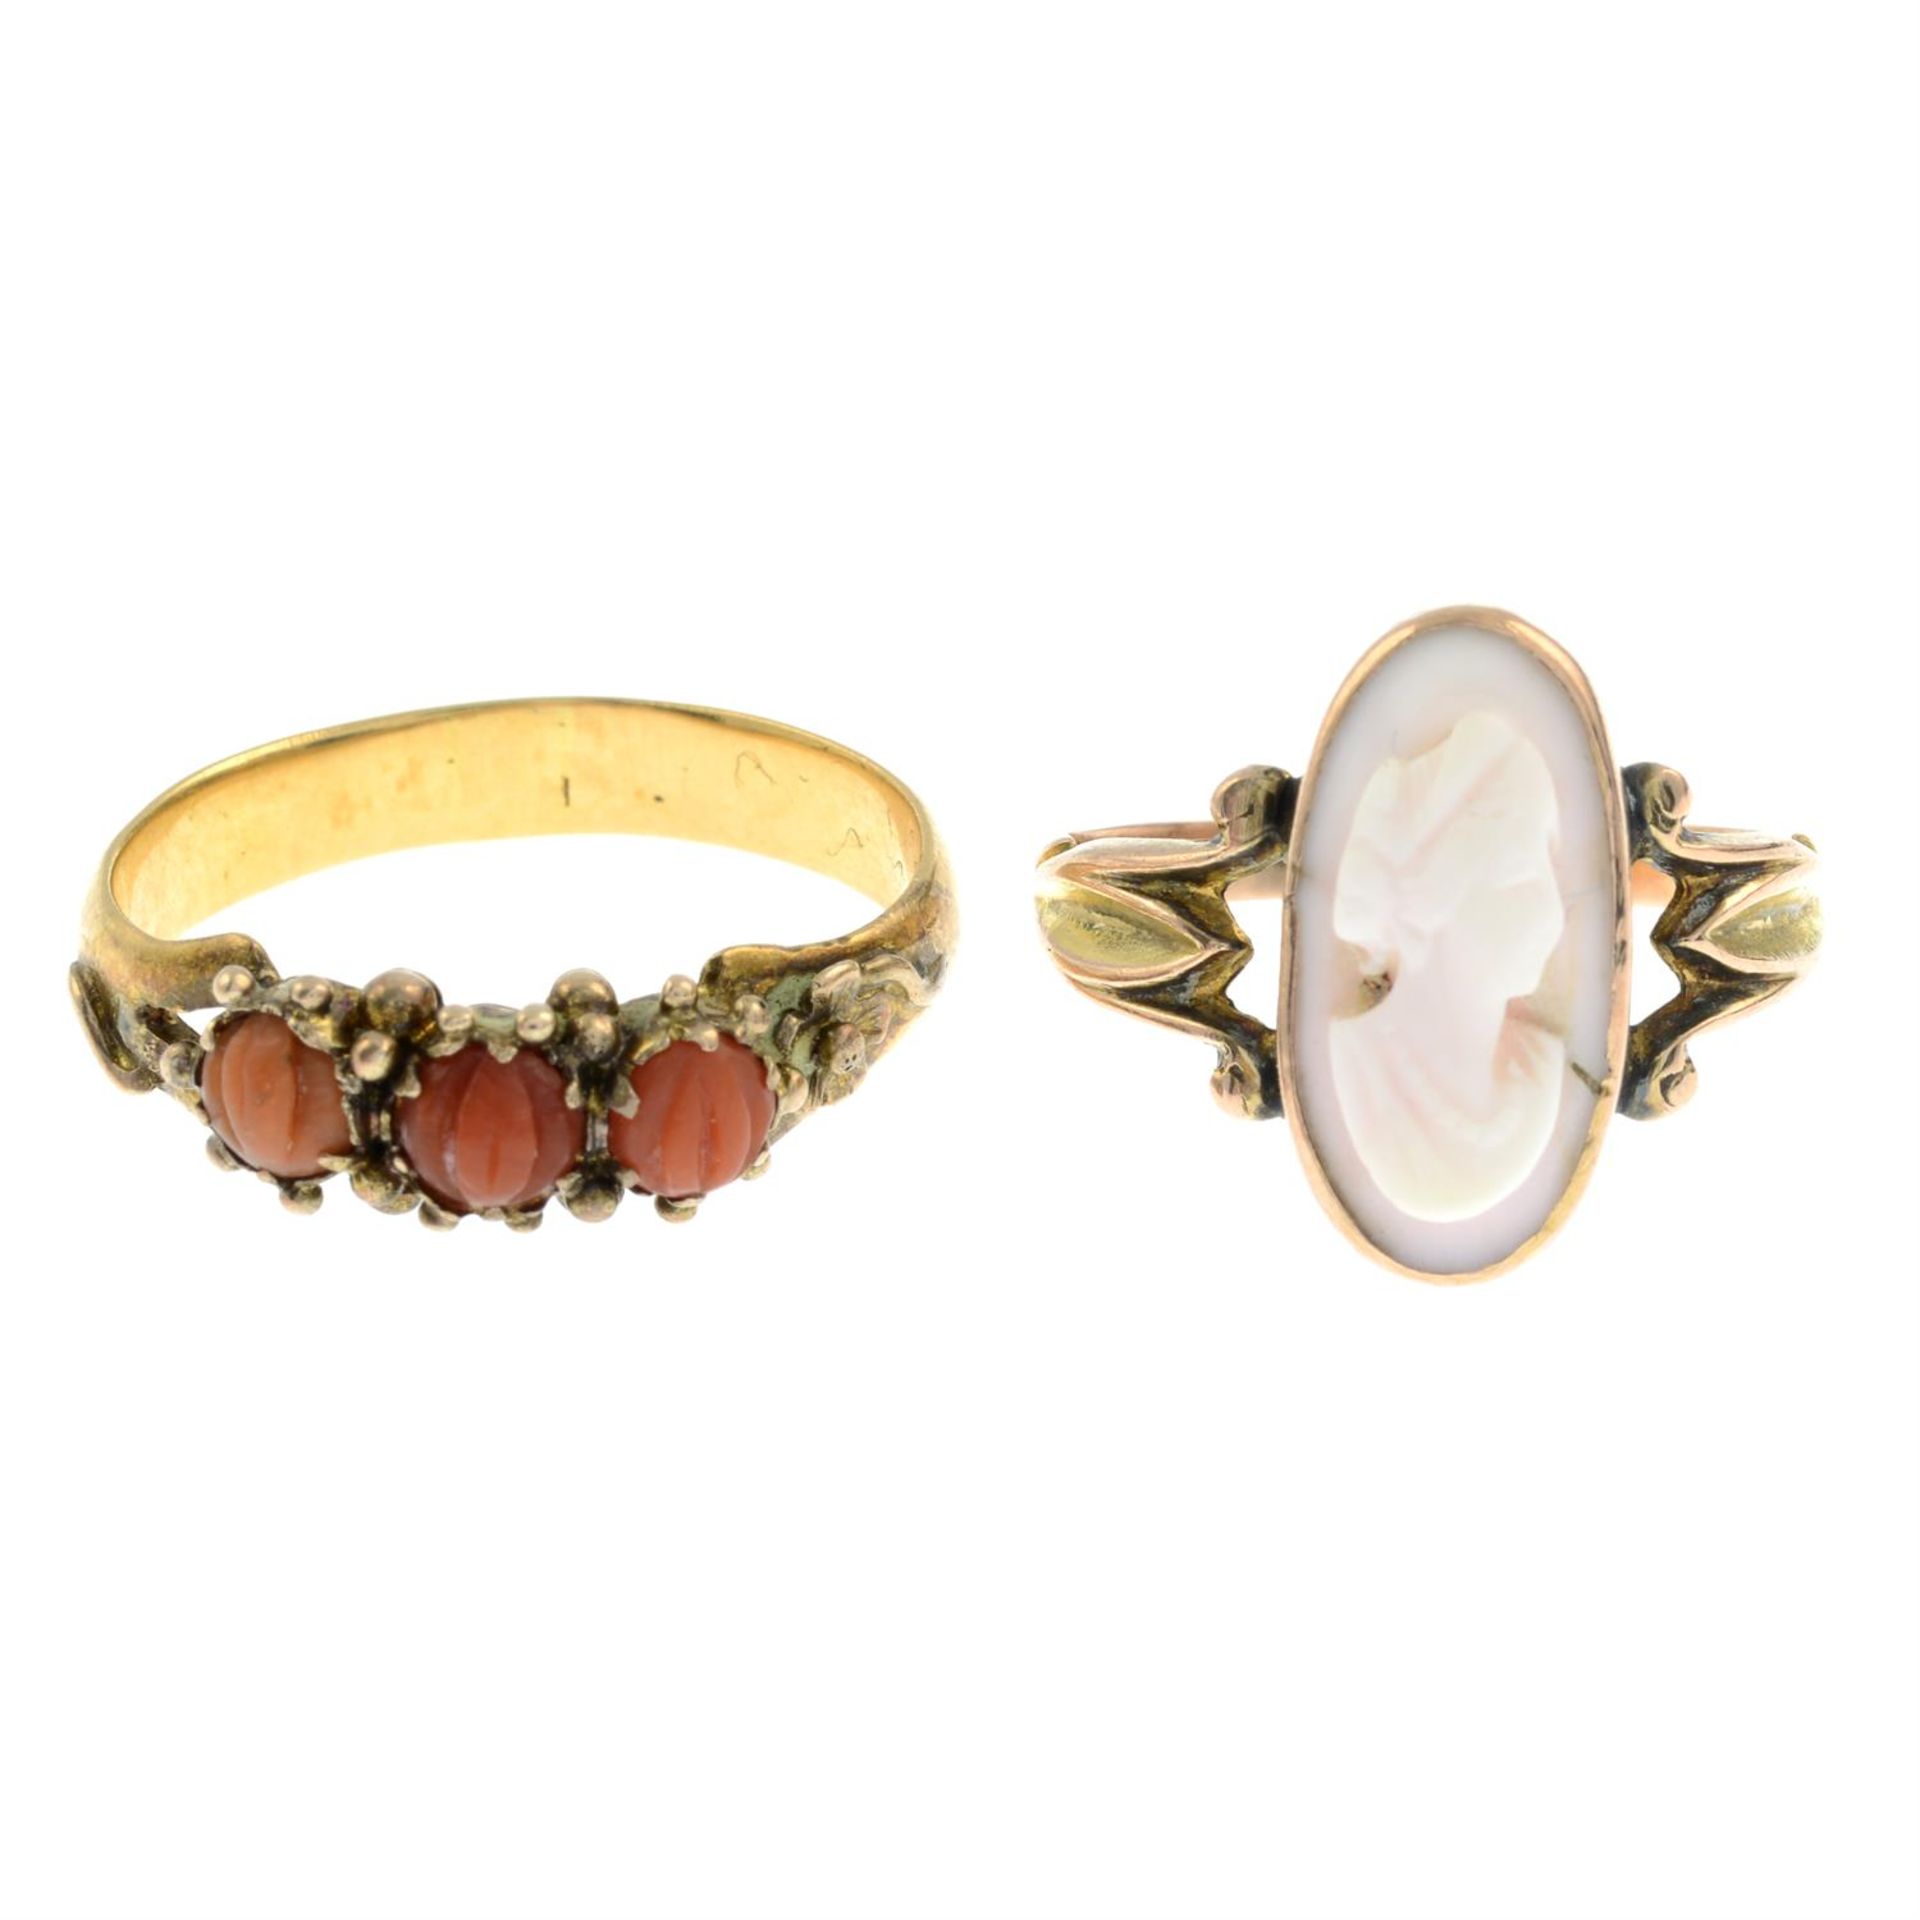 A carved cameo ring and a coral three-stone ring.